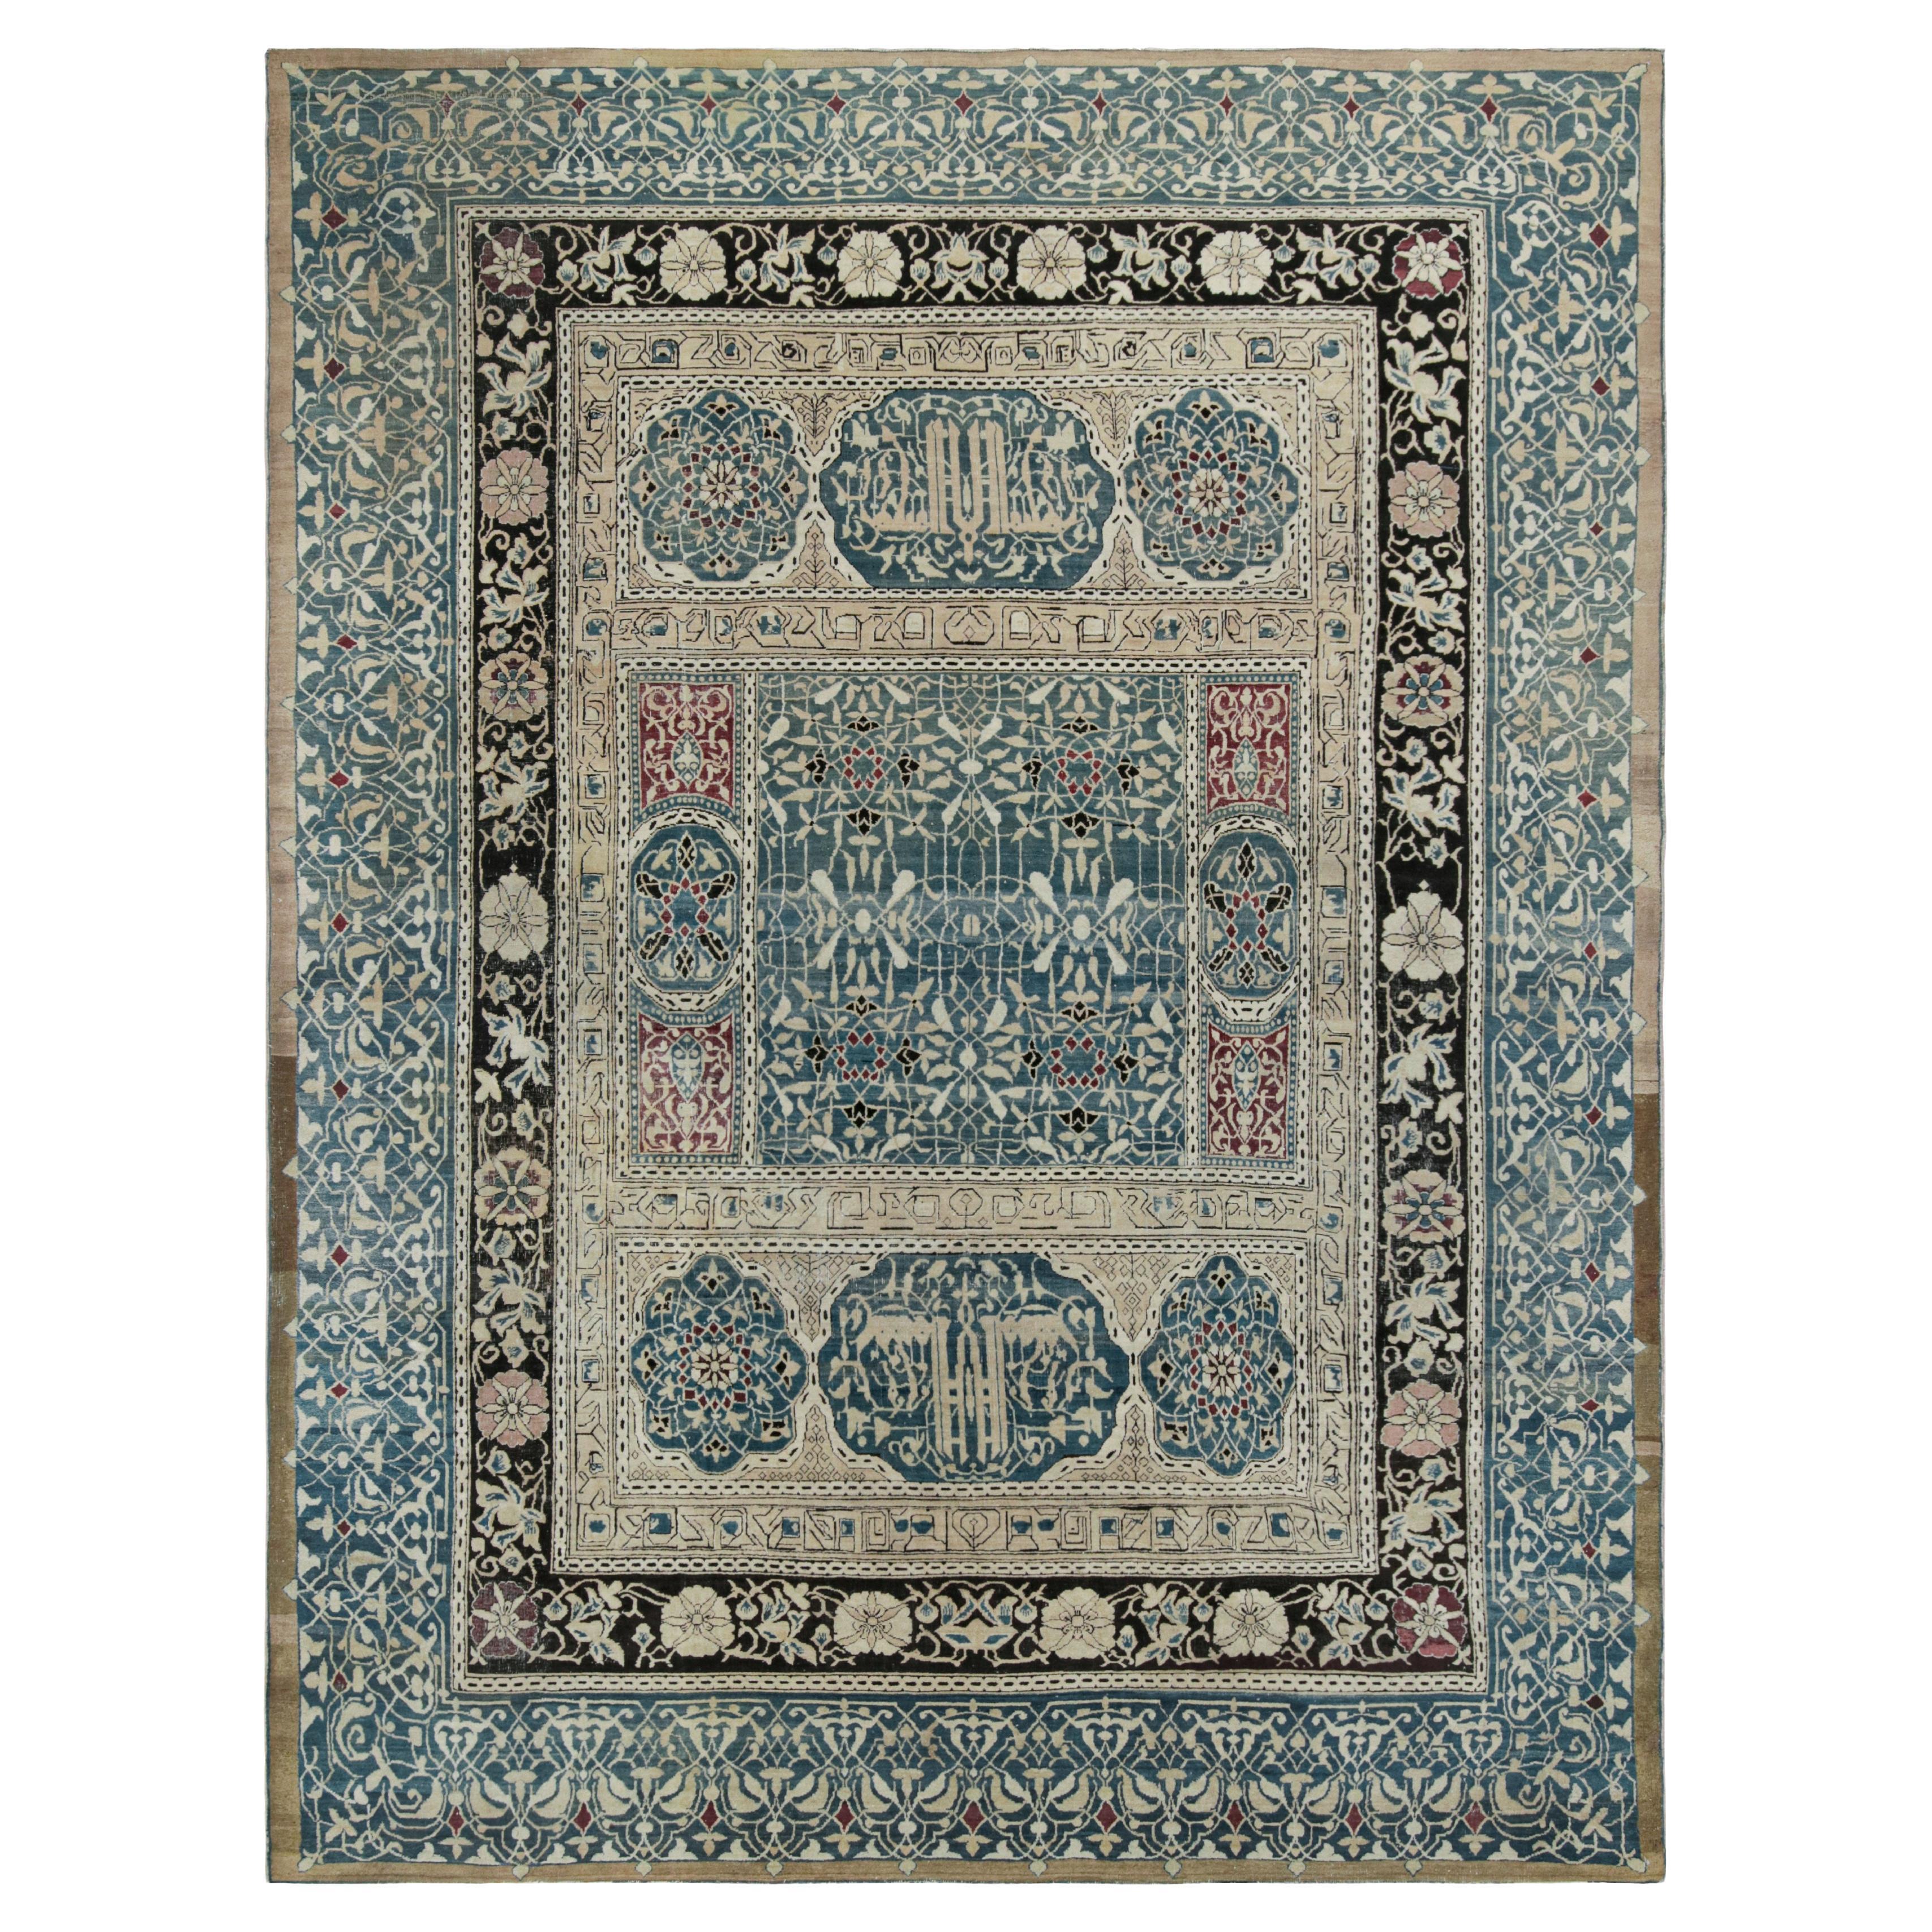 Antique Agra Rug in Beige and Teal with Floral Patterns